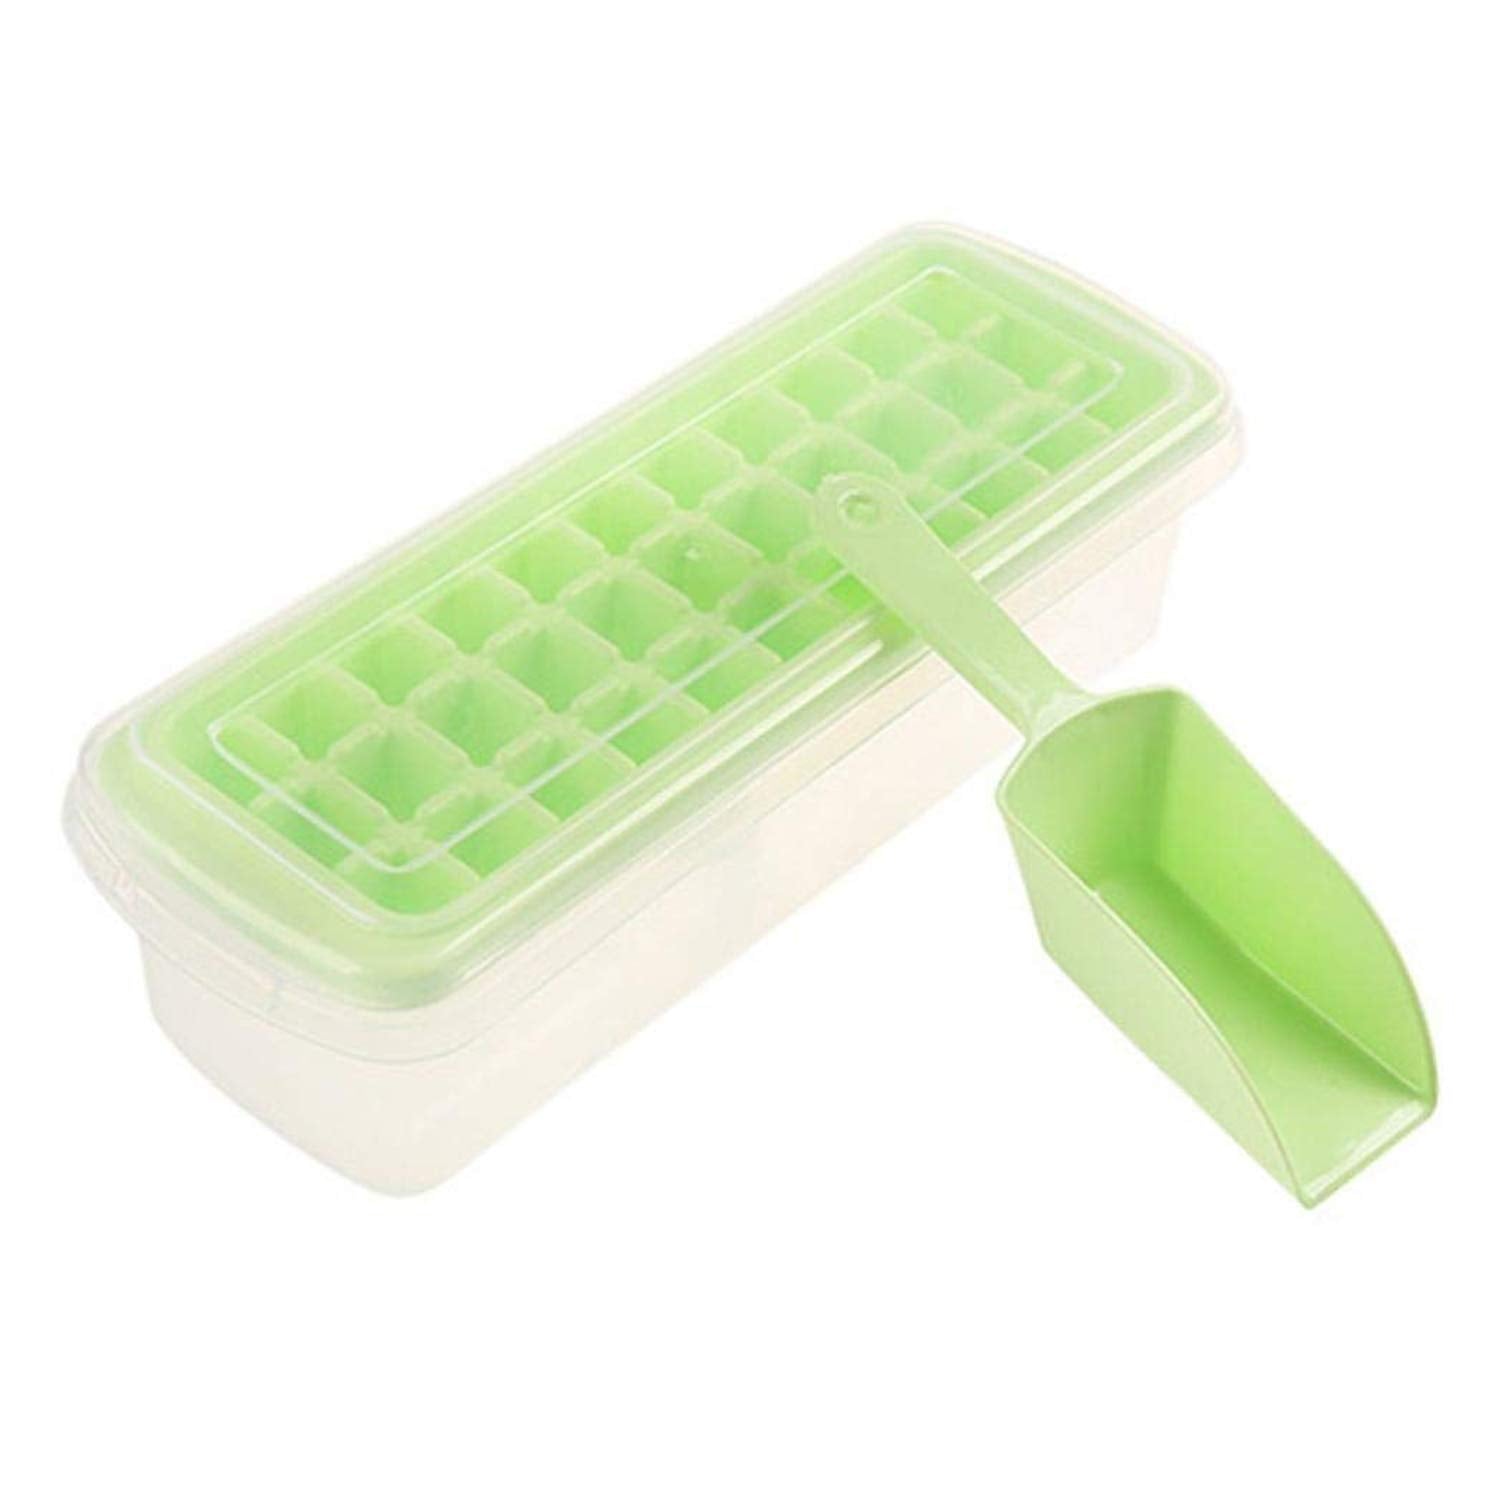 Kuber Industries Plastic Ice Tray with Storage Box, Spoon and Transparent Cover Lid, Random Colors (32 Cubes), Pack of 1-KUBMART2946